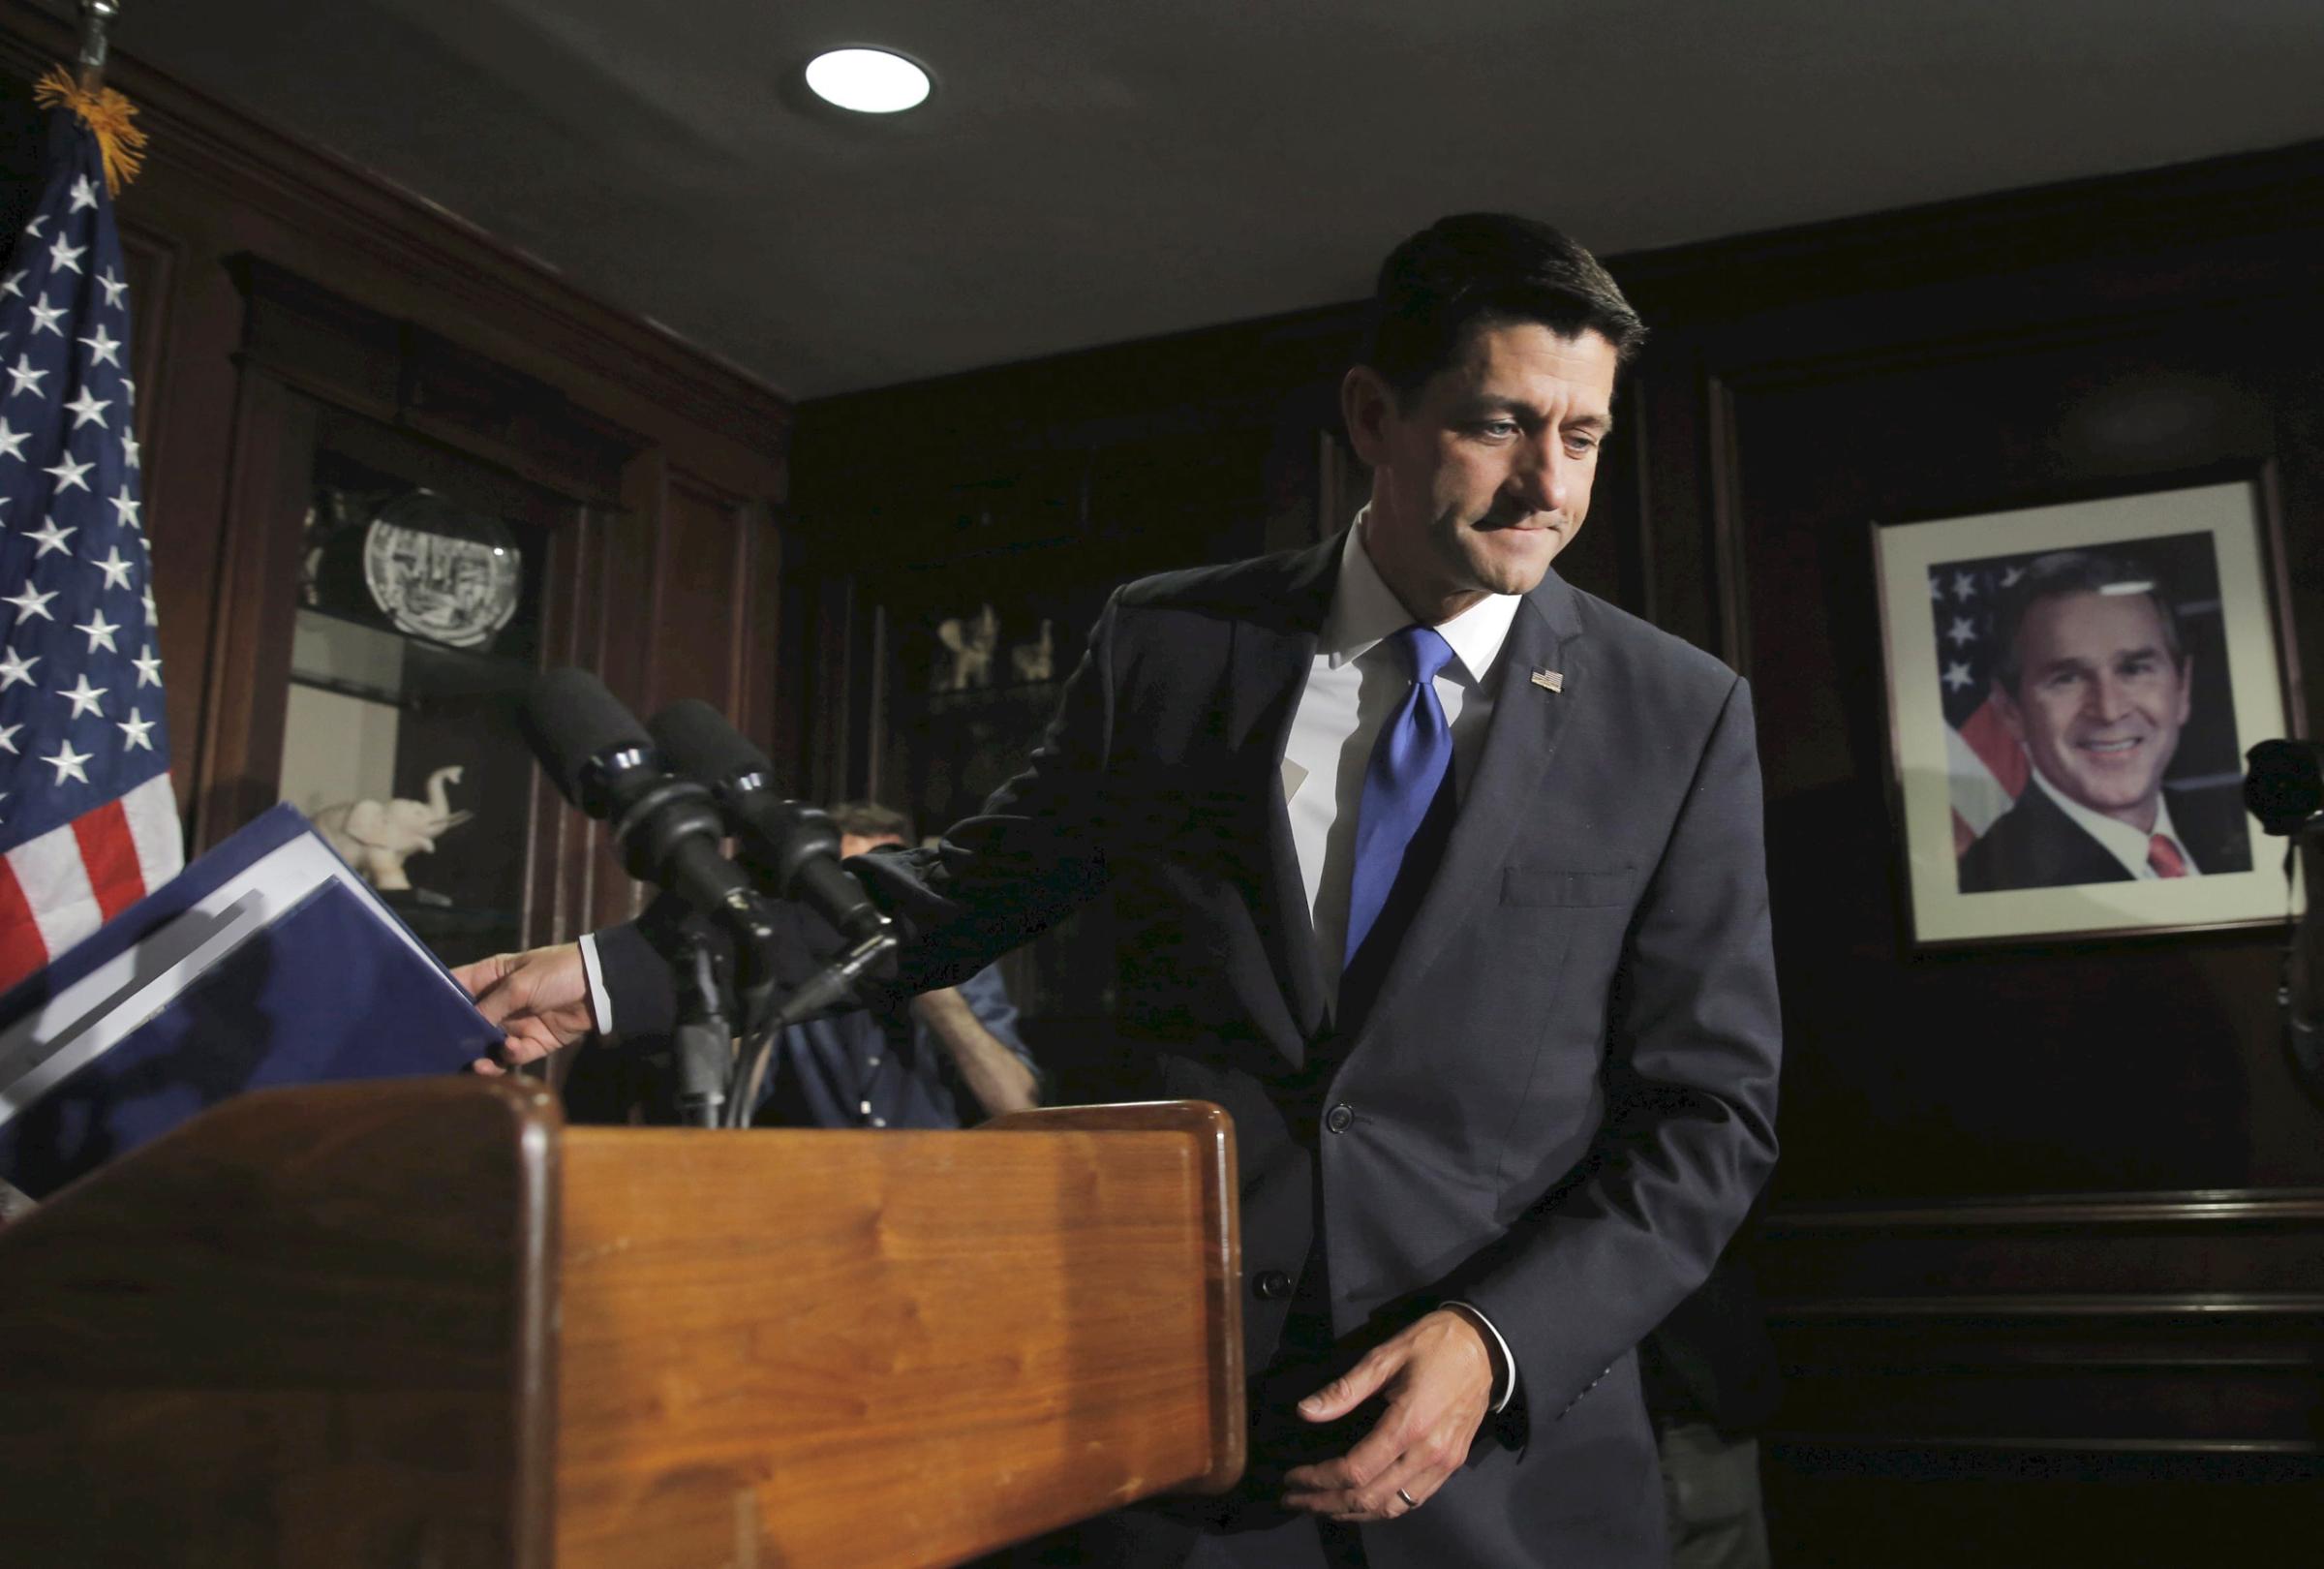 “Count me out,” said House Speaker Paul Ryan, discussing the ongoing race for the GOP nomination